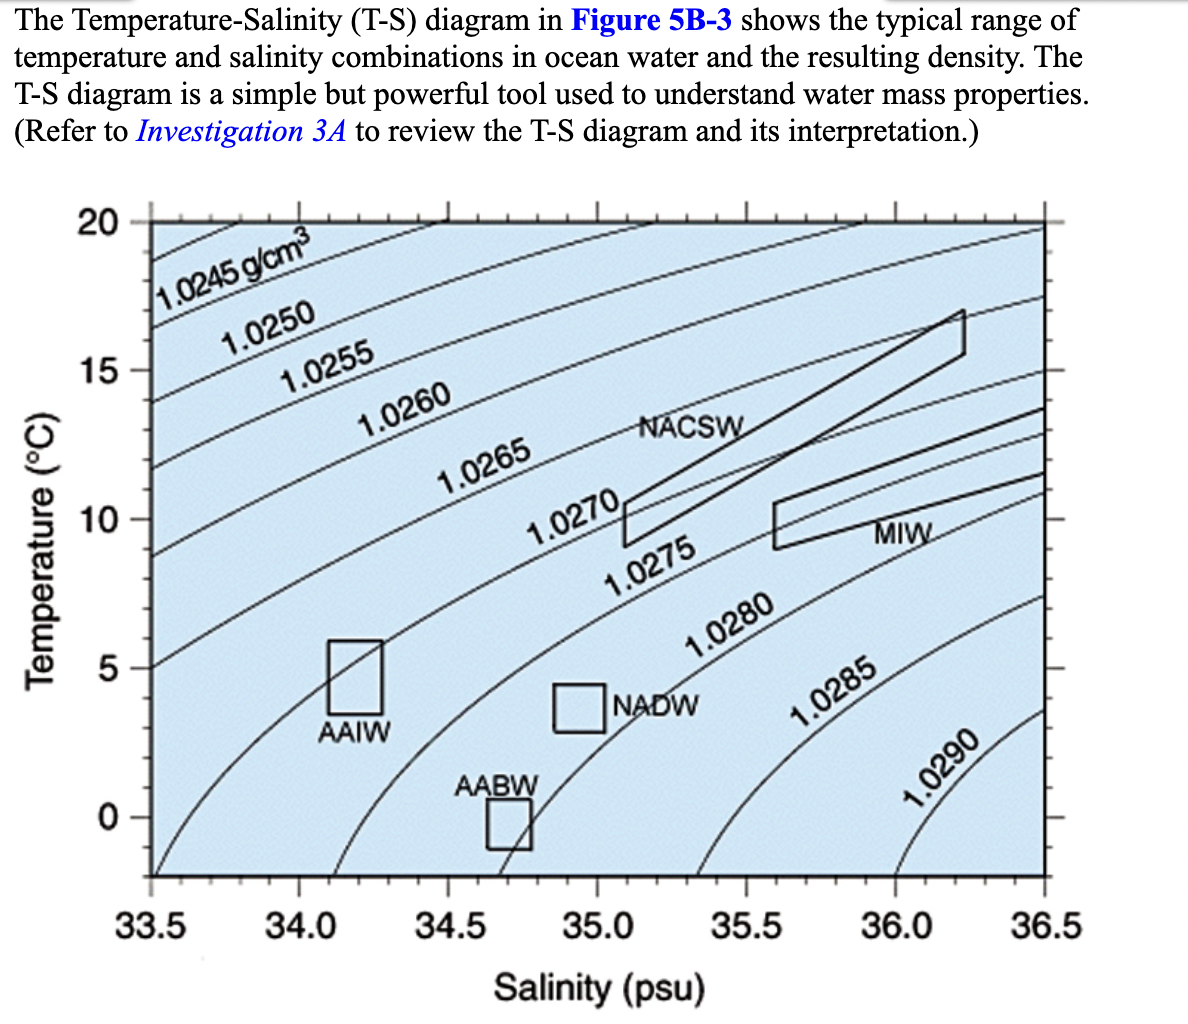 The Temperature-Salinity (T-S) diagram in Figure 5B-3 shows the typical range of
temperature and salinity combinations in ocean water and the resulting density. The
T-S diagram is a simple but powerful tool used to understand water mass properties.
(Refer to Investigation 3A to review the T-S diagram and its interpretation.)
20
1.0245 g/cm
15
1.0250
1.0255
1.0260
NACSW
10
1.0265
1.0270,
MIW
5
1.0275
1.0280
AAIW
ONADW
1.0285
AABW
33.5
34.0
34.5
35.0
35.5
Salinity (psu)
36.0
36.5
Temperature (°C)
1.0290
